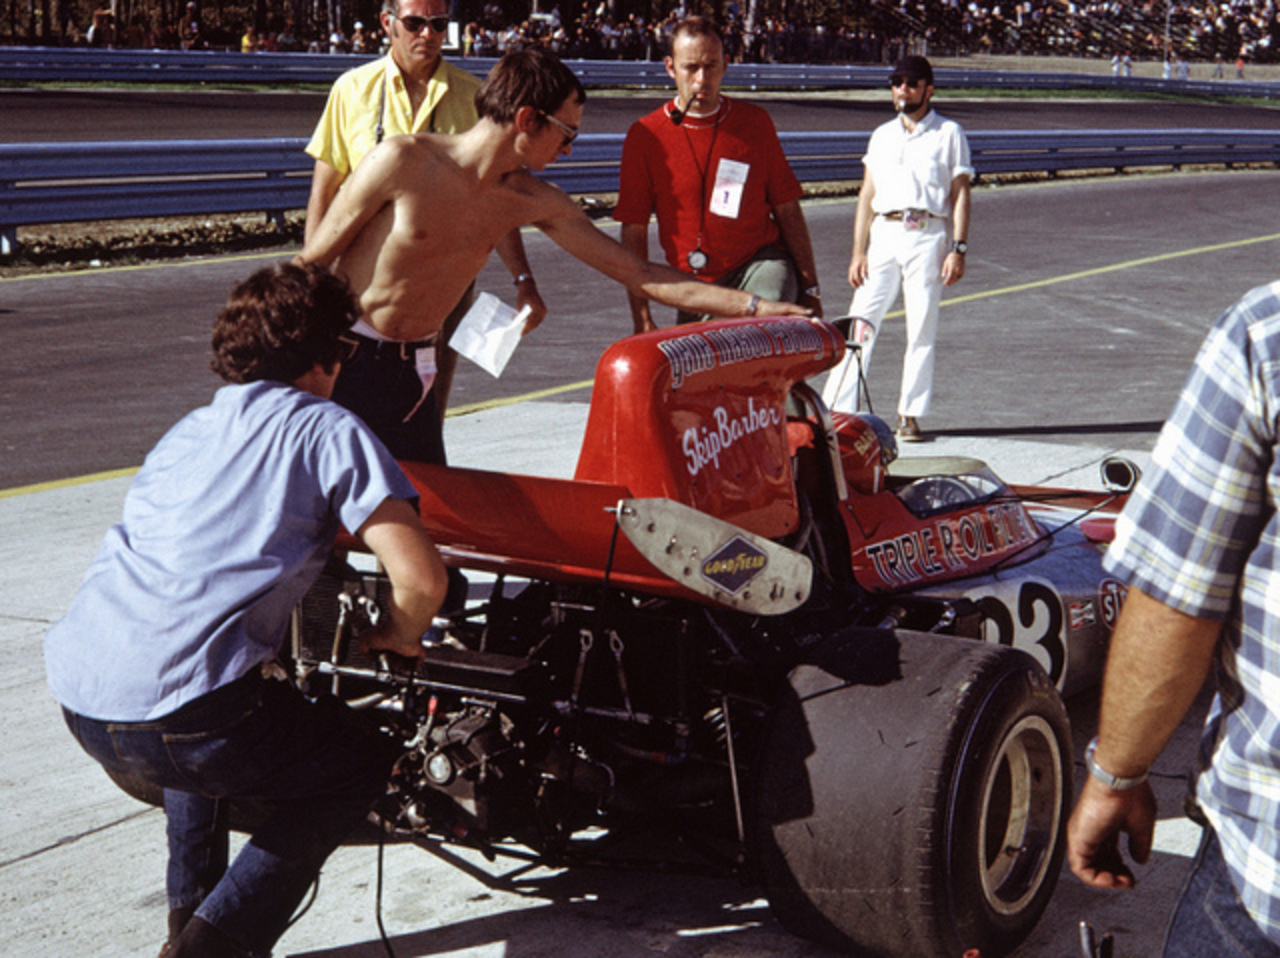 March 711 Formula 1 car driven by Skip Barber | Flickr - Photo ...